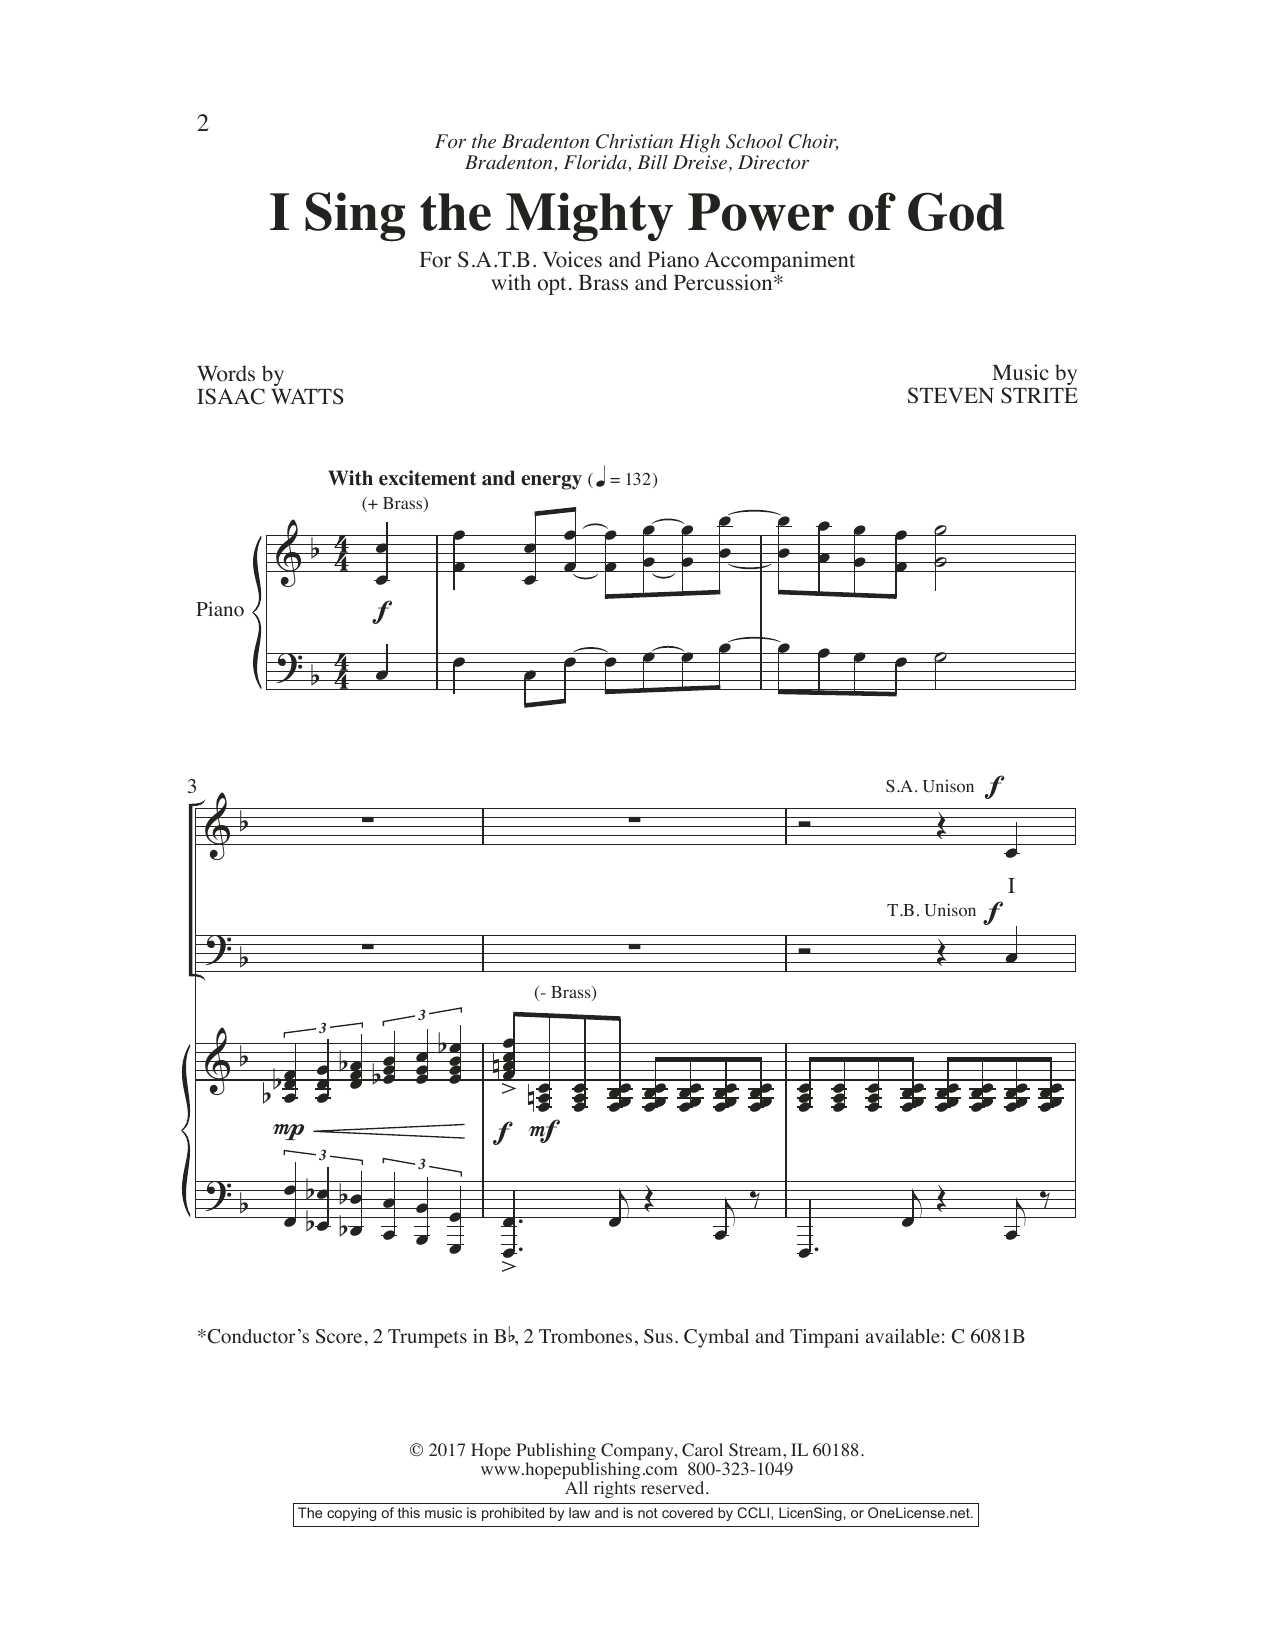 Download Steven Strite I Sing the Mighty Power of God Sheet Music